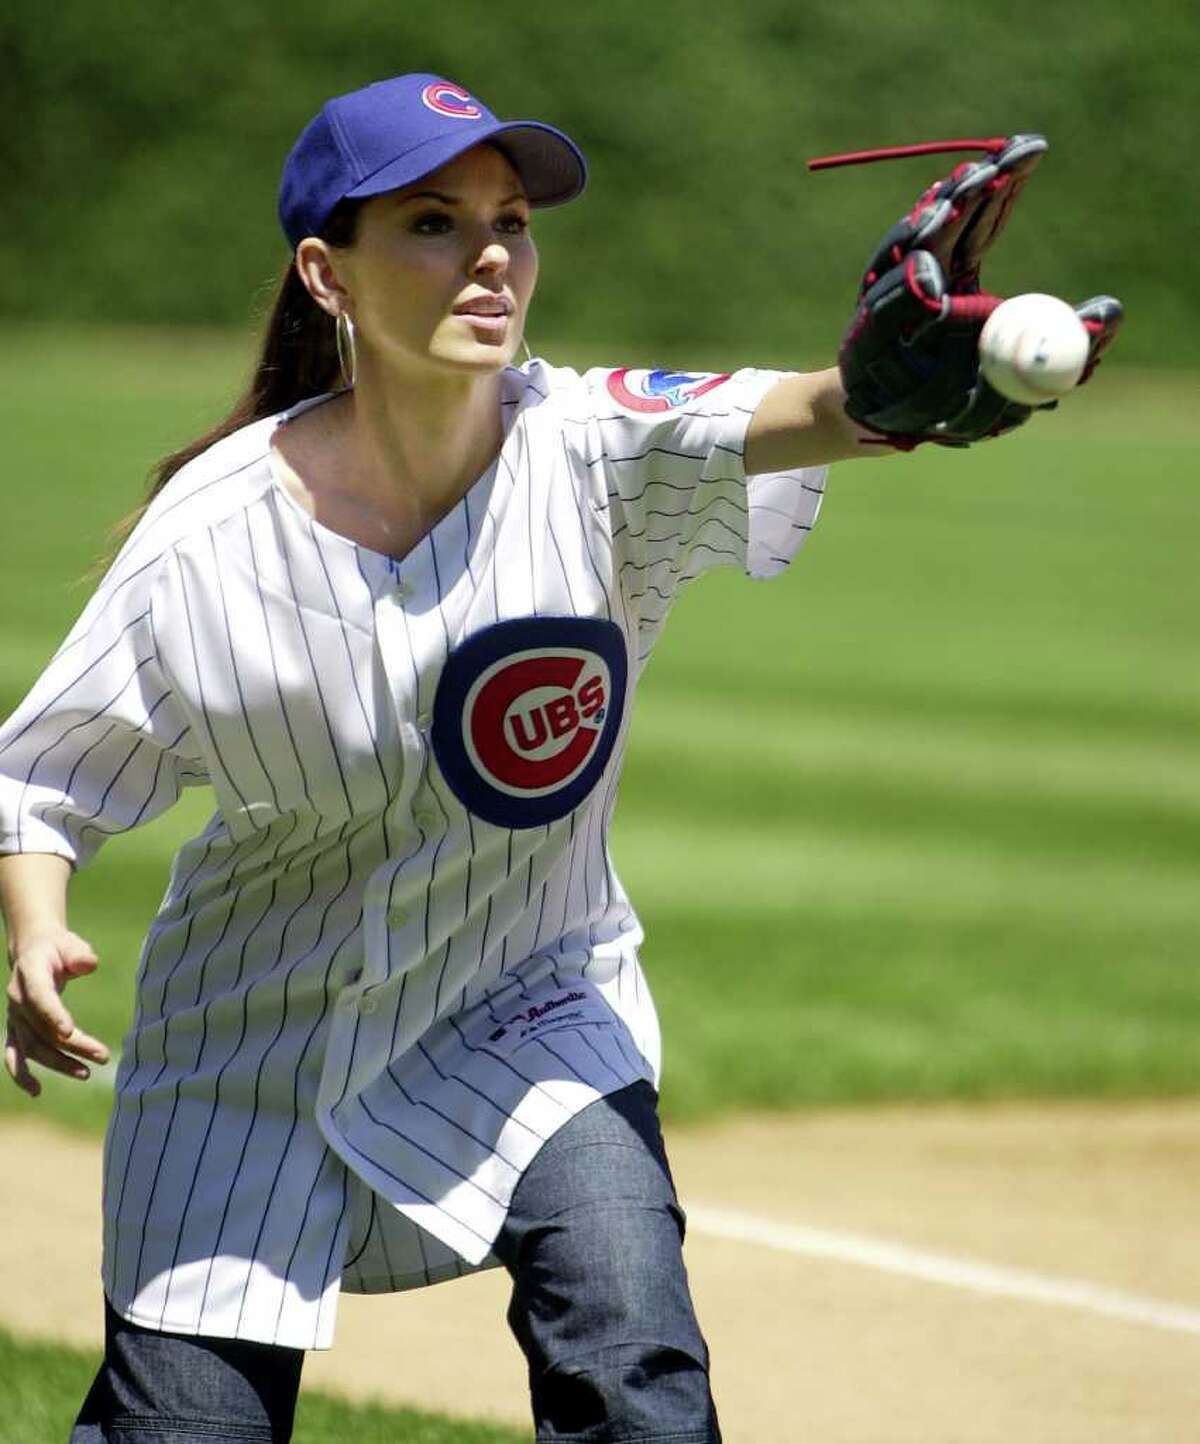 Singer Shania Twain warms up to throw out the ceremonial first pitch of the Chicago Cubs-Philadelphia Phillies game at Wrigley Field in Chicago, Thursday, July 24, 2003